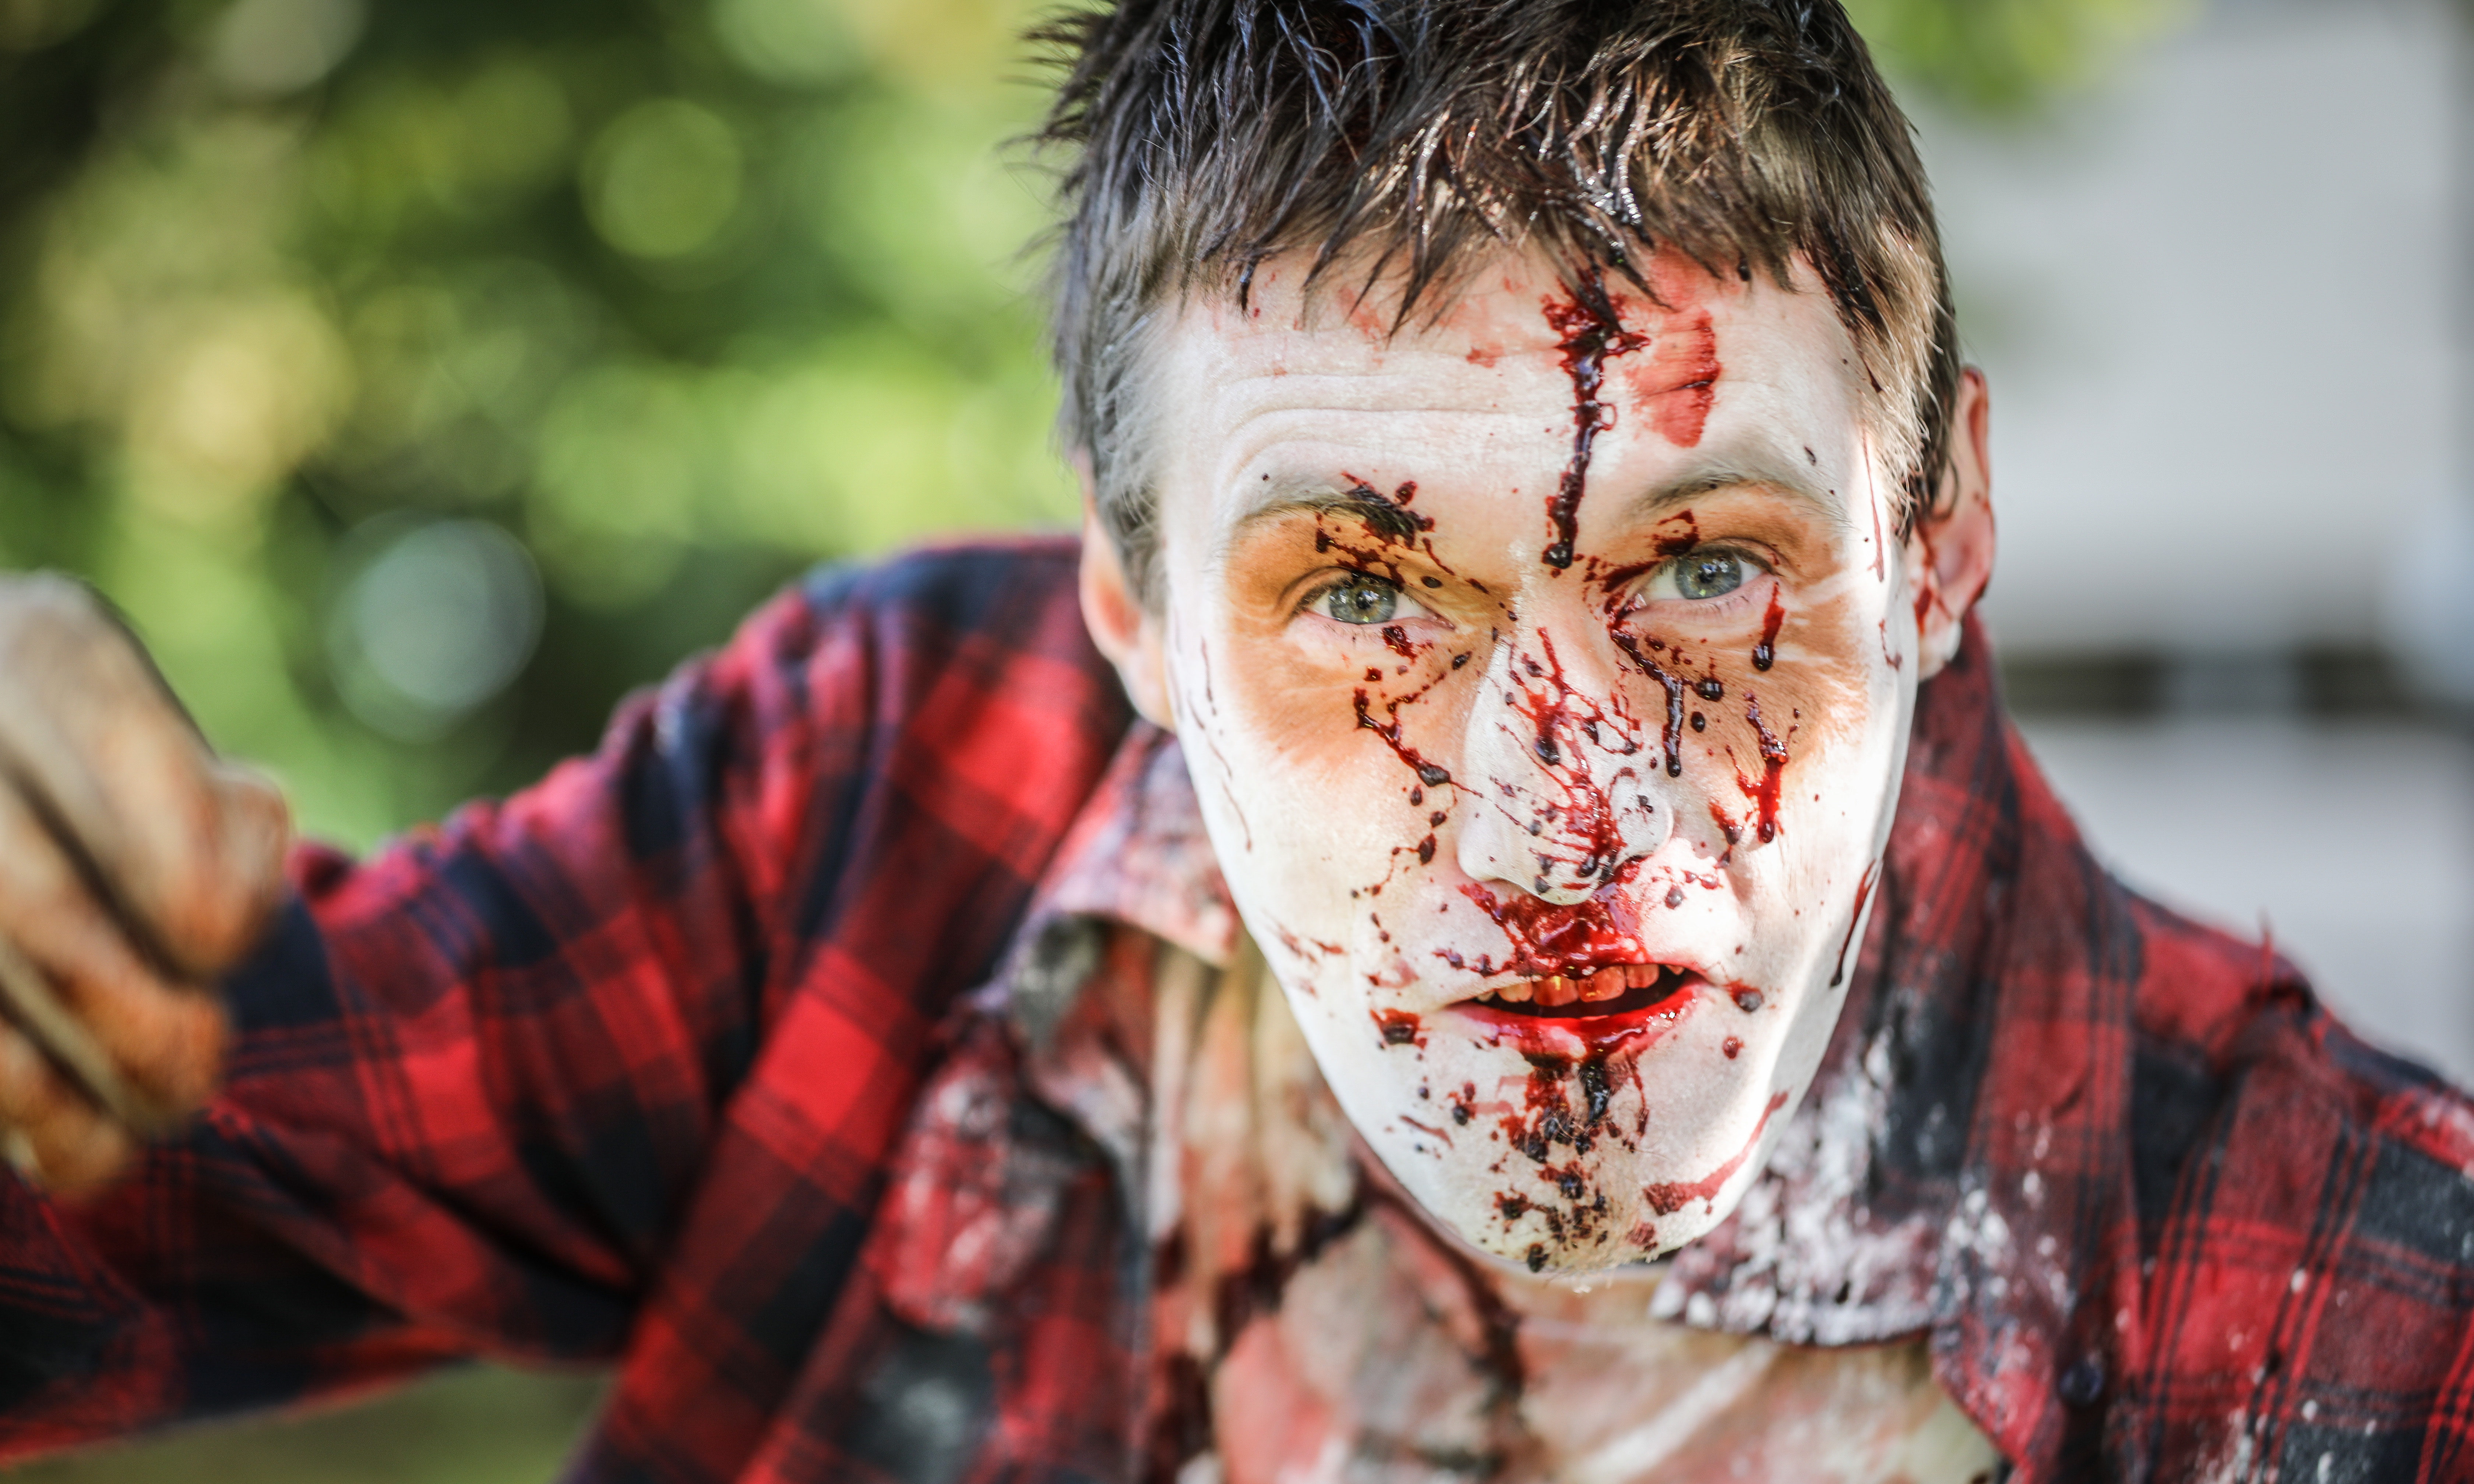 Theatrical make up and fake blood was used to give participants a ghoulish look to scare passers by.